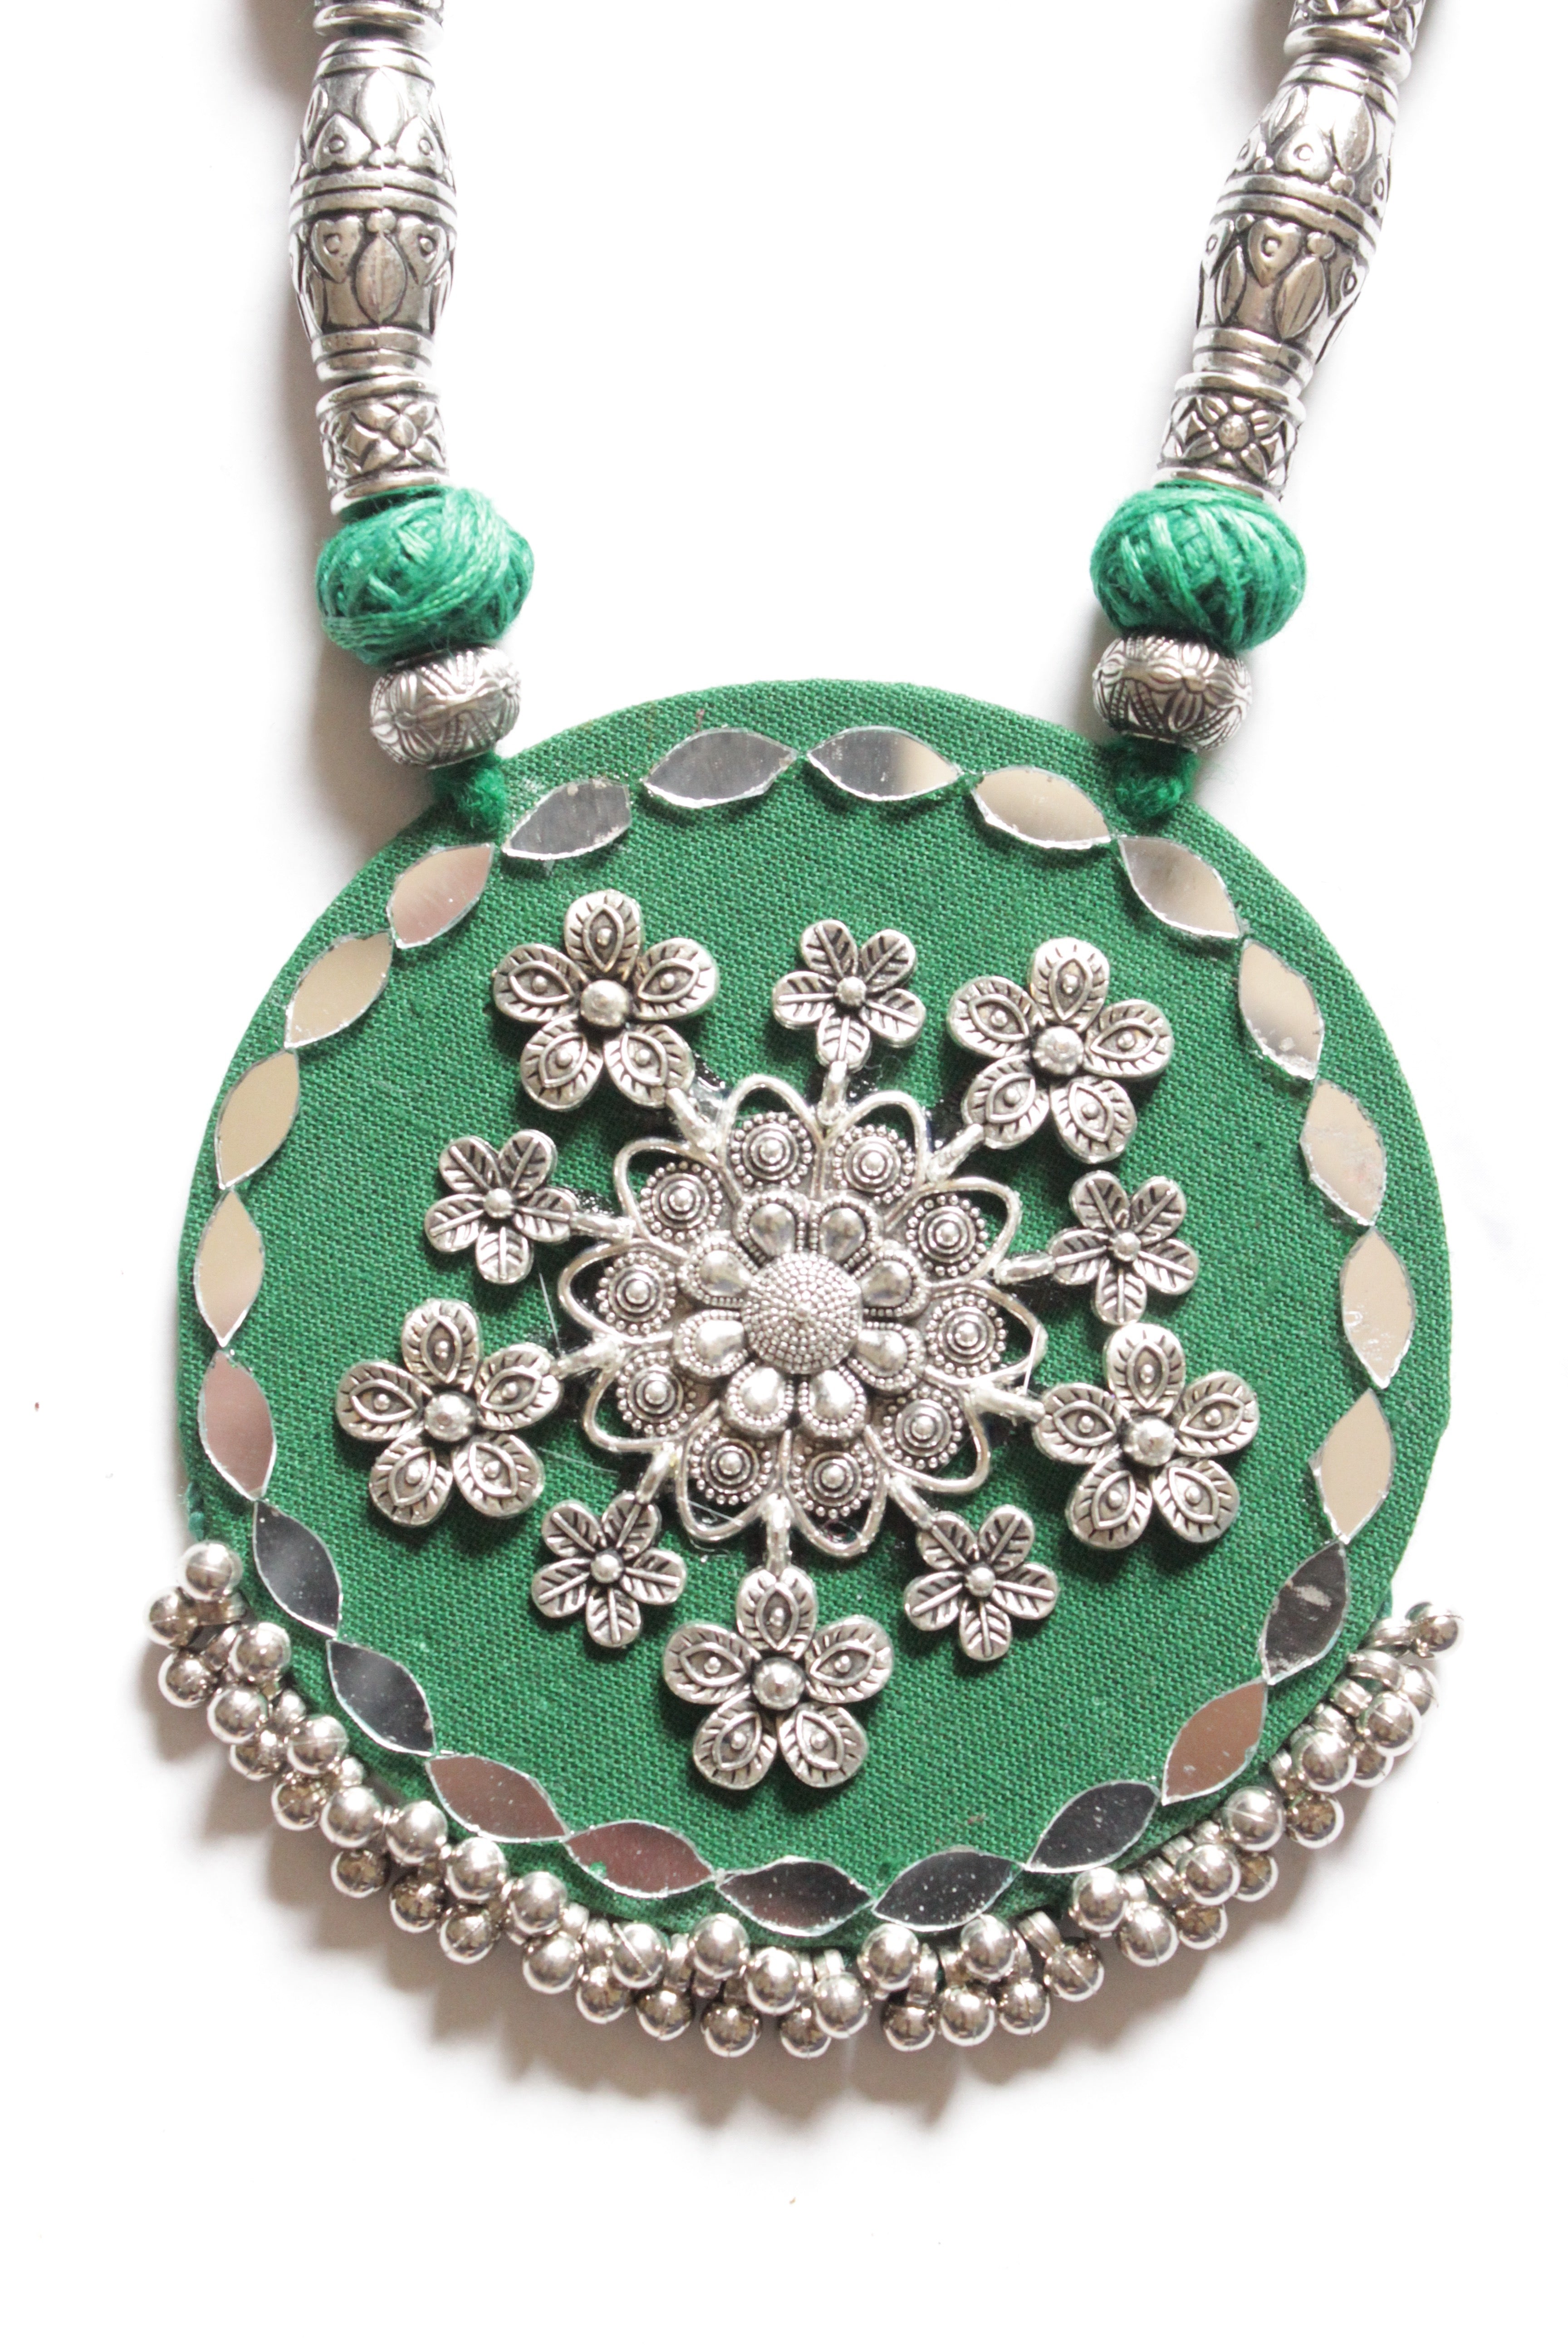 Mirror Work and Flower Metal Accents Embellished Green Fabric Necklace Set